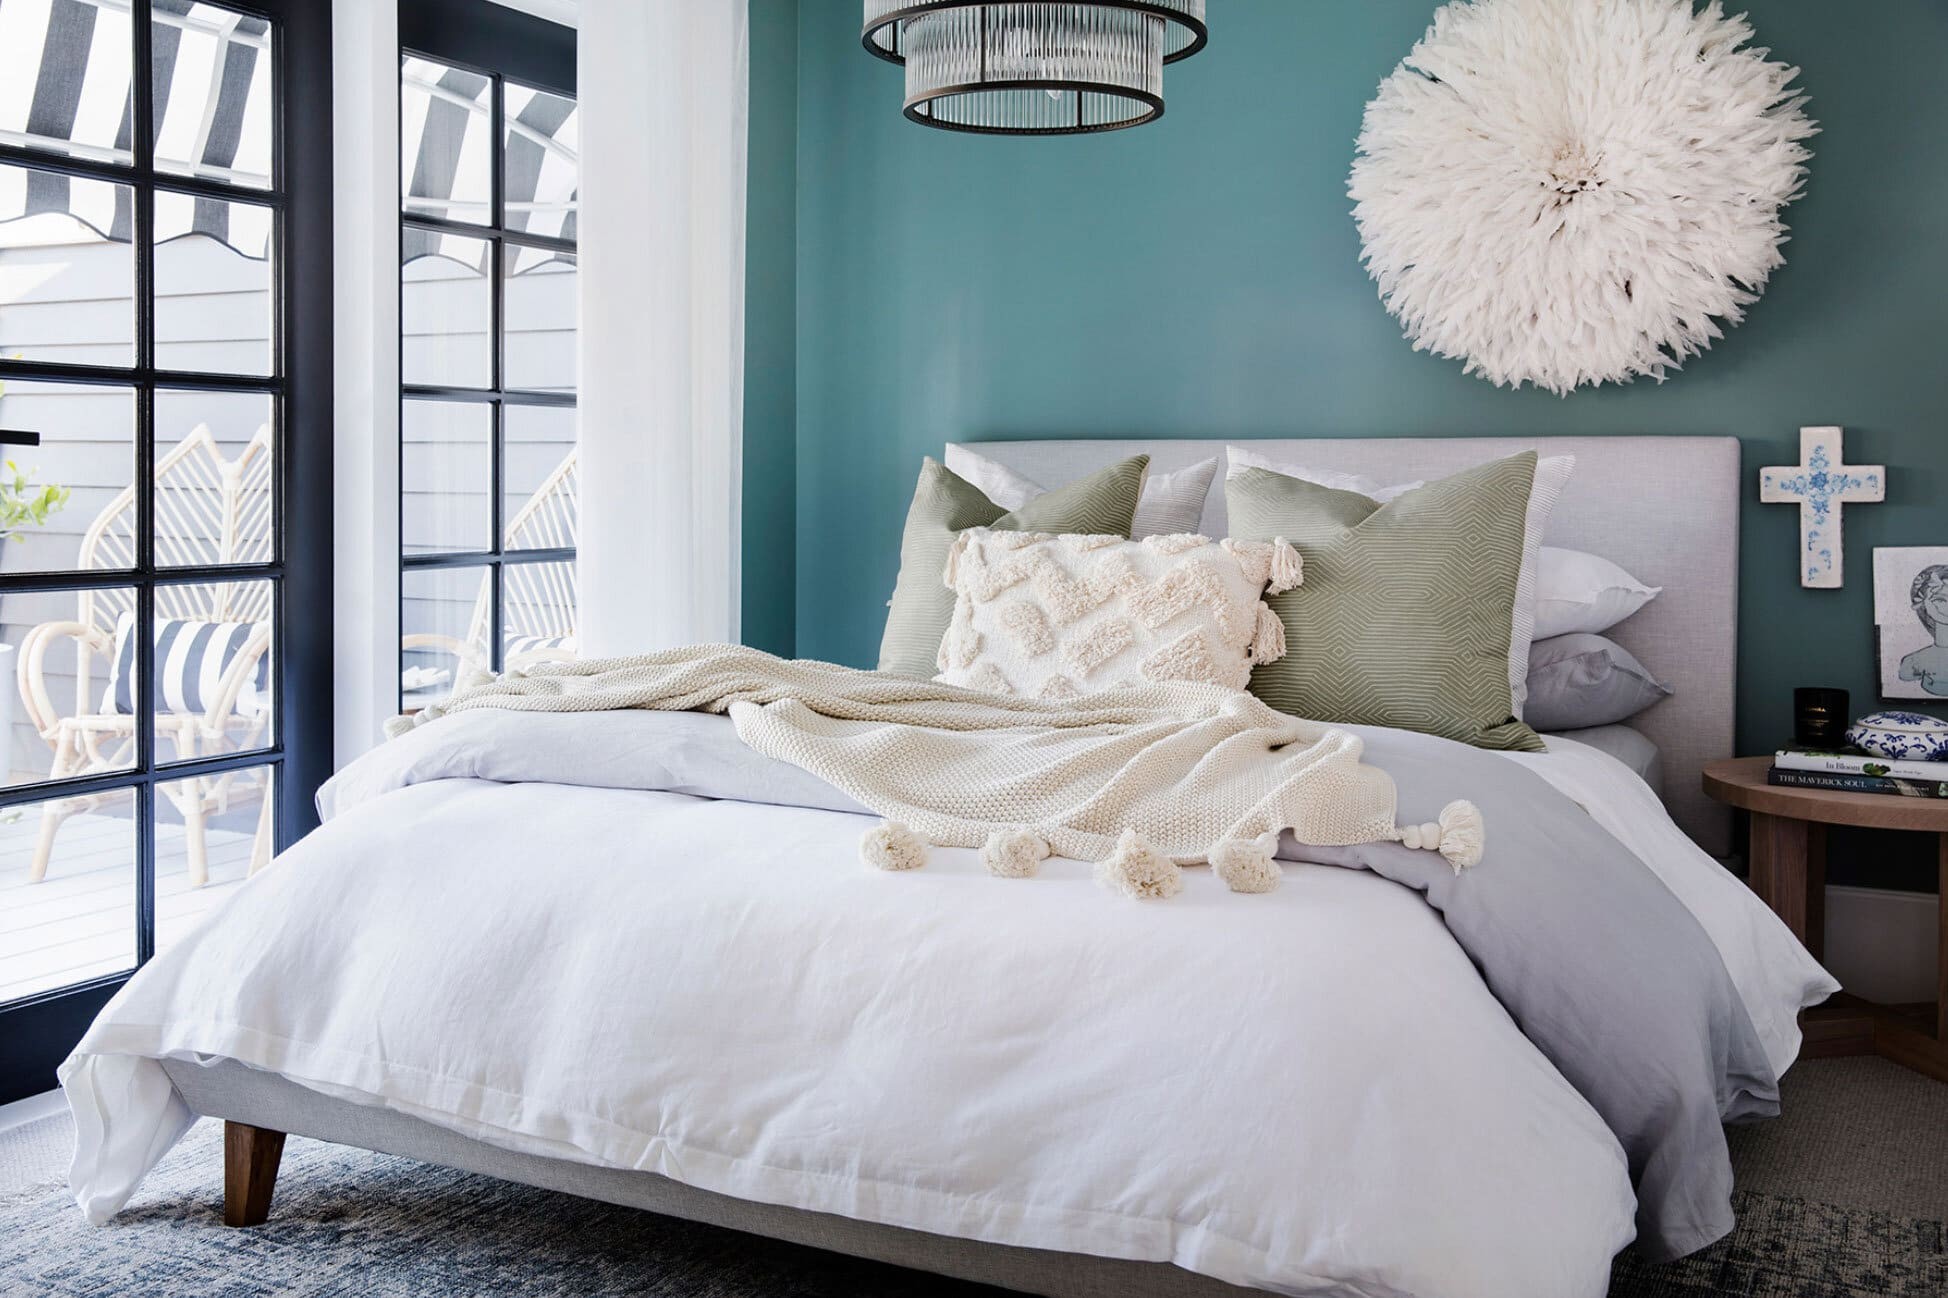 dulux teal green bedroom paint colour and white bedding